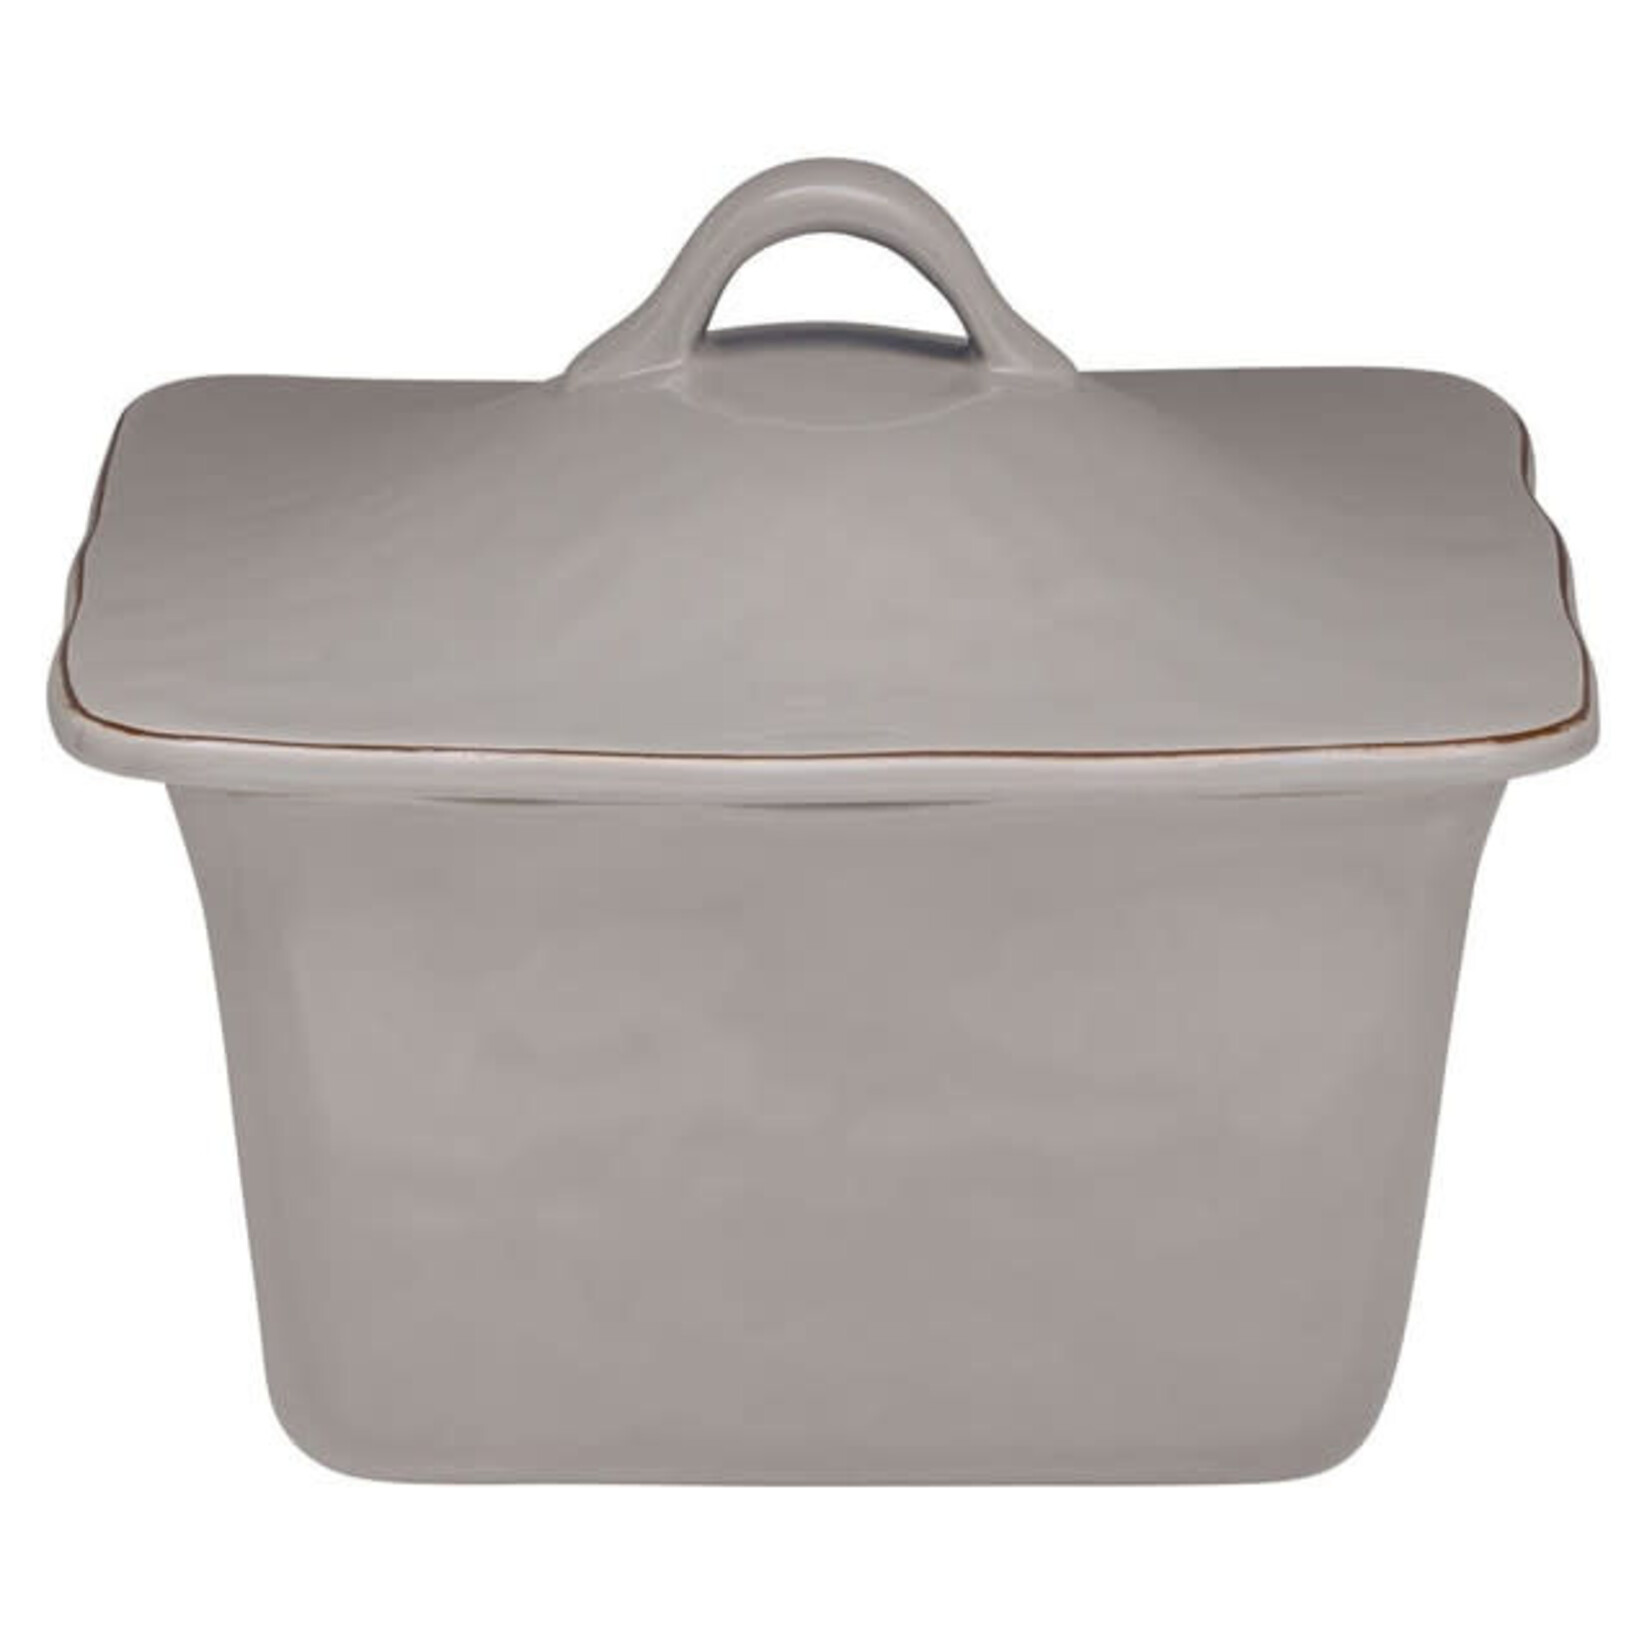 Skyros CANTARIA SQUARE COVERED CASSEROLE - GREIGE